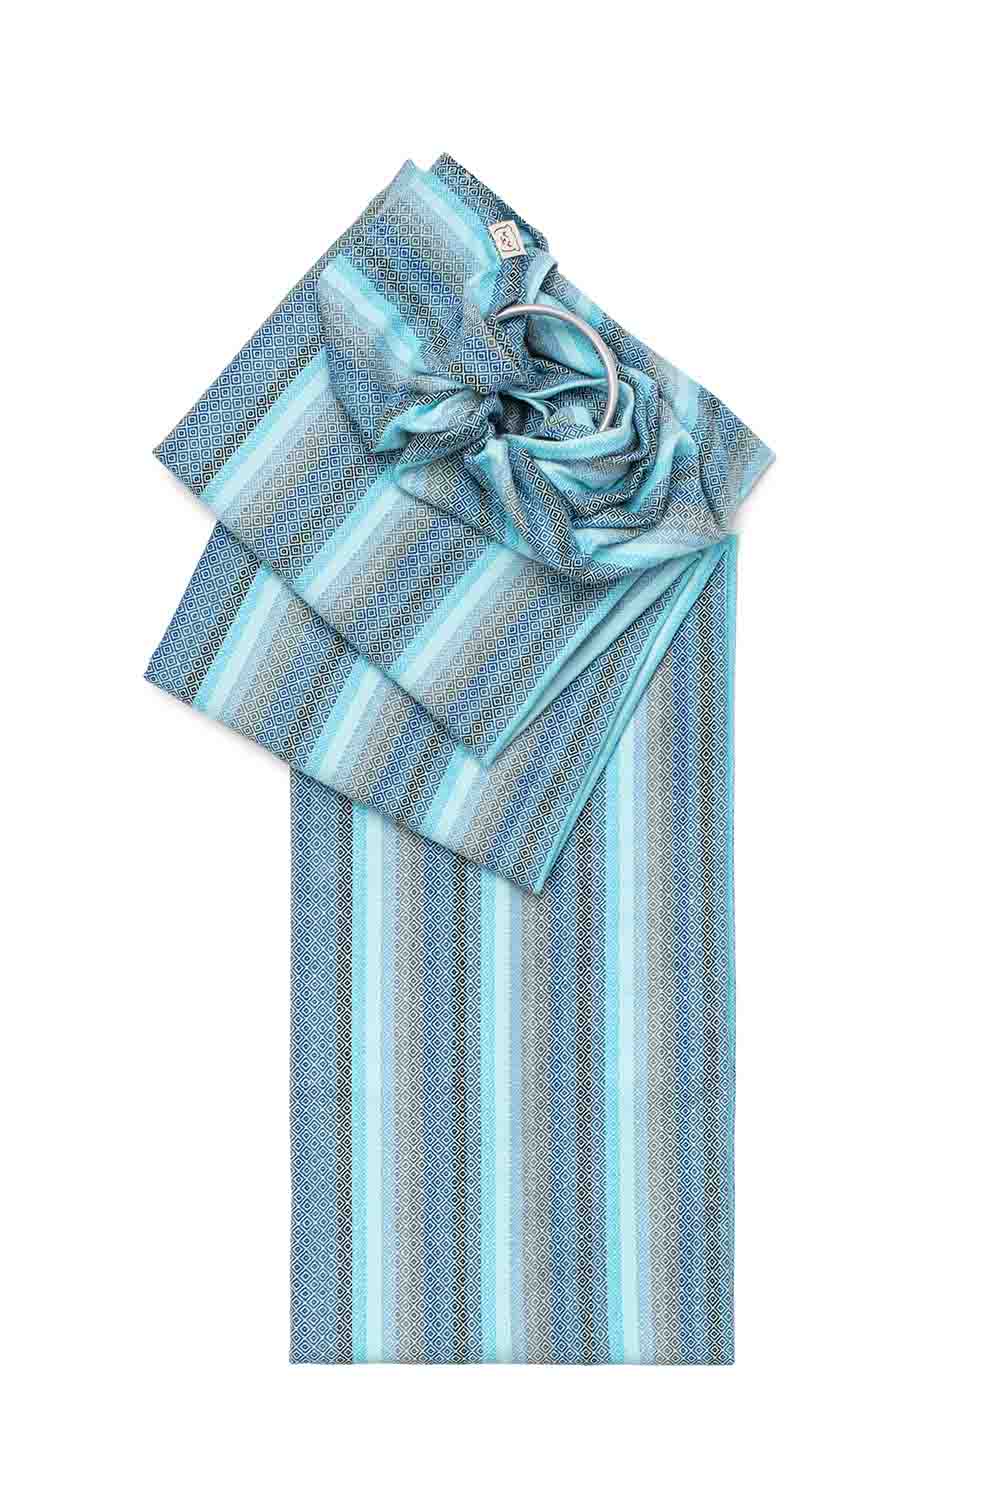 Baby Blues - Signature Handwoven Ring Sling